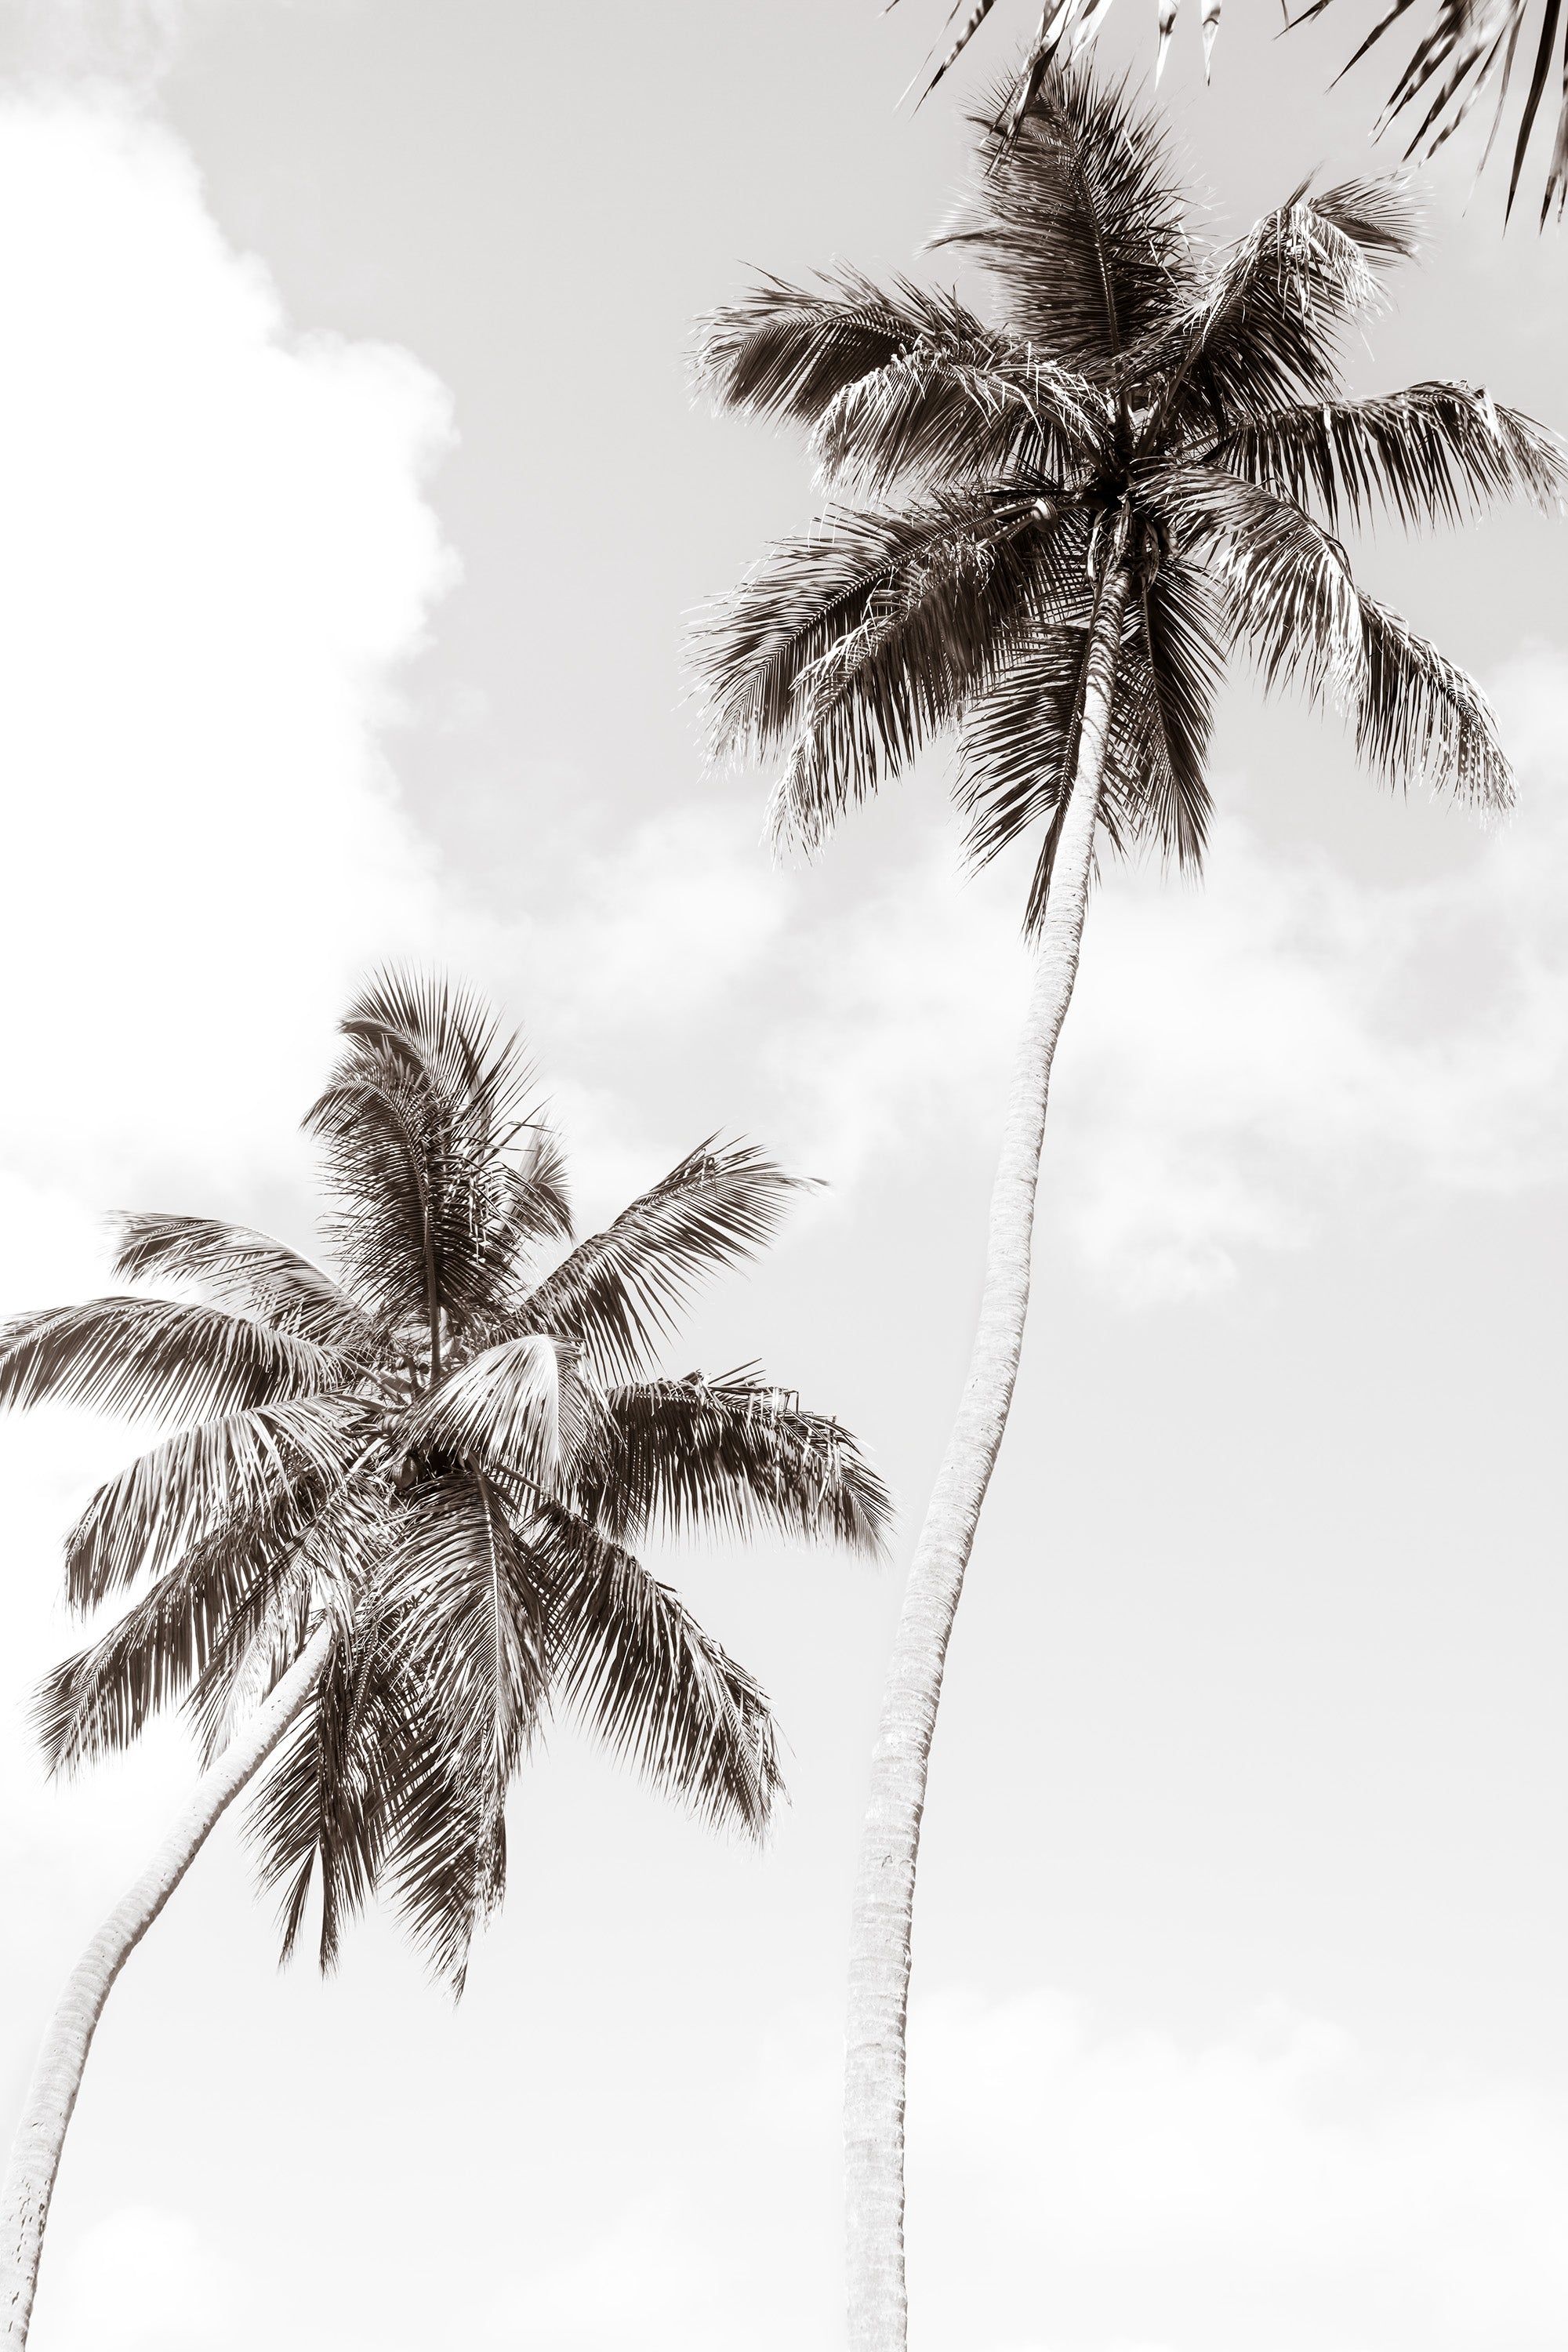 A black and white photo of two palm trees - Palm tree